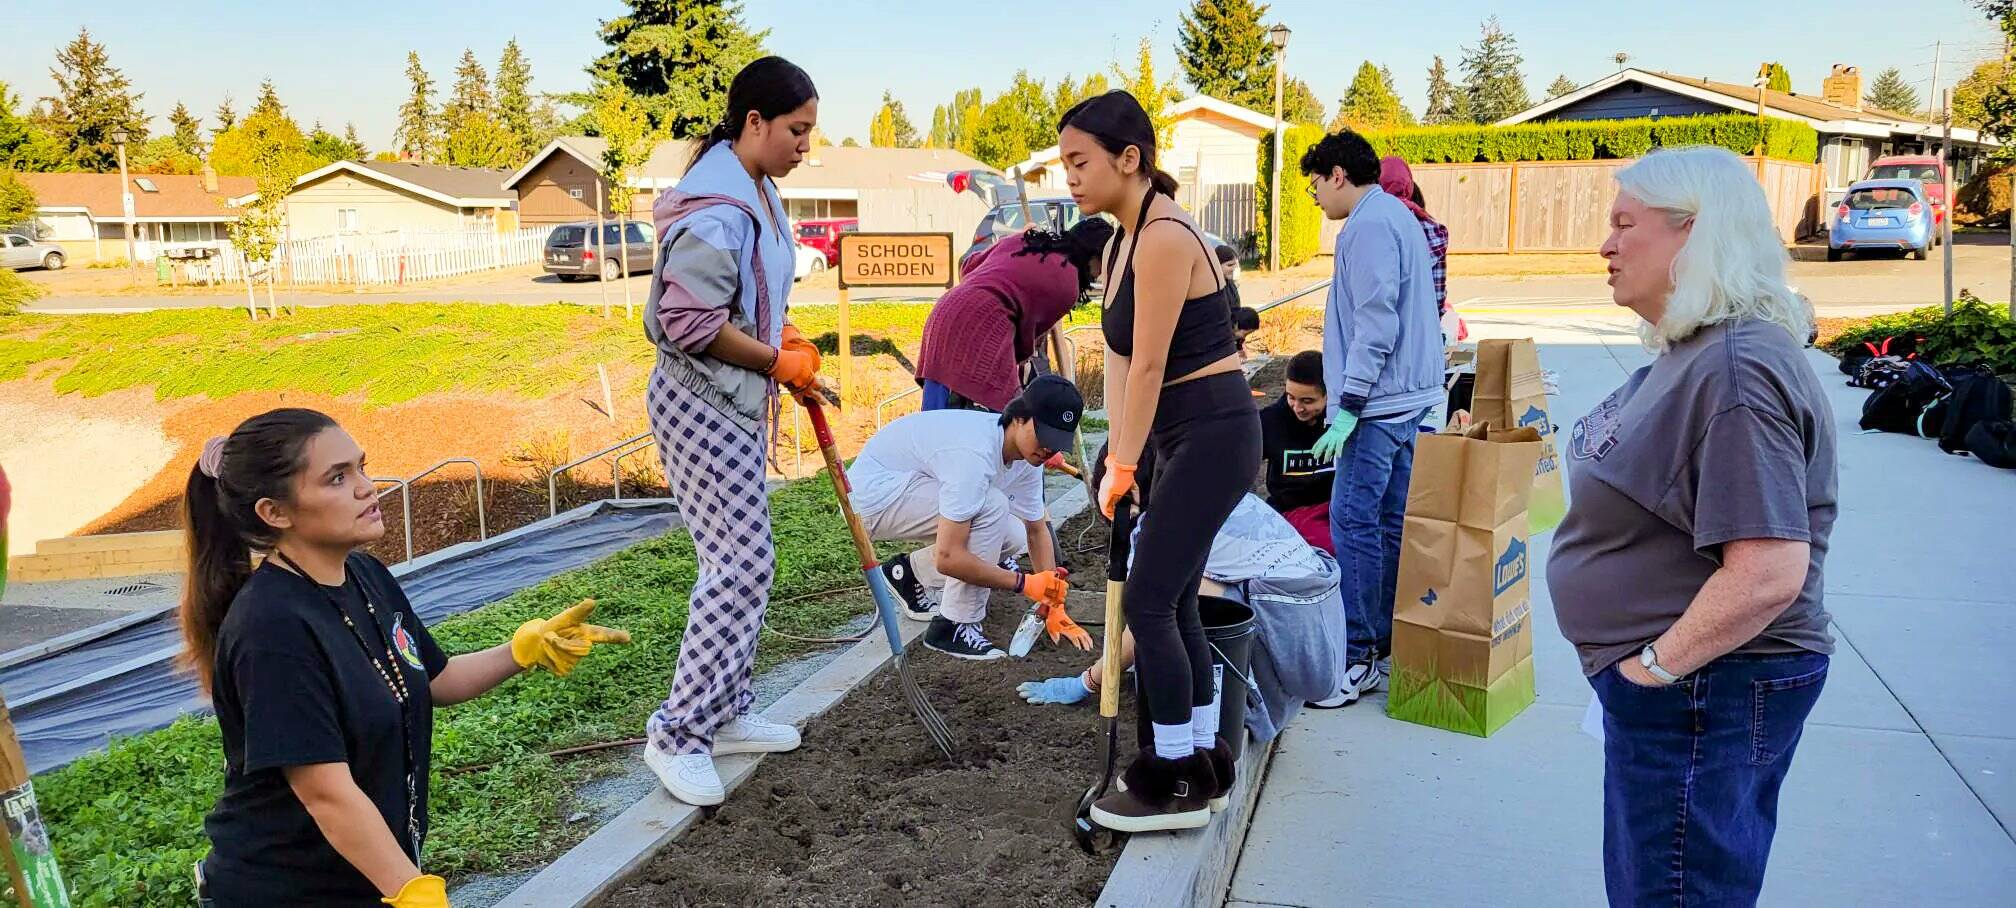 FWPS photos
Scholars in the Native American Coalition Club (NACC) work in a garden at Thomas Jefferson High School, learning about Indigenous food sources, plants and more.